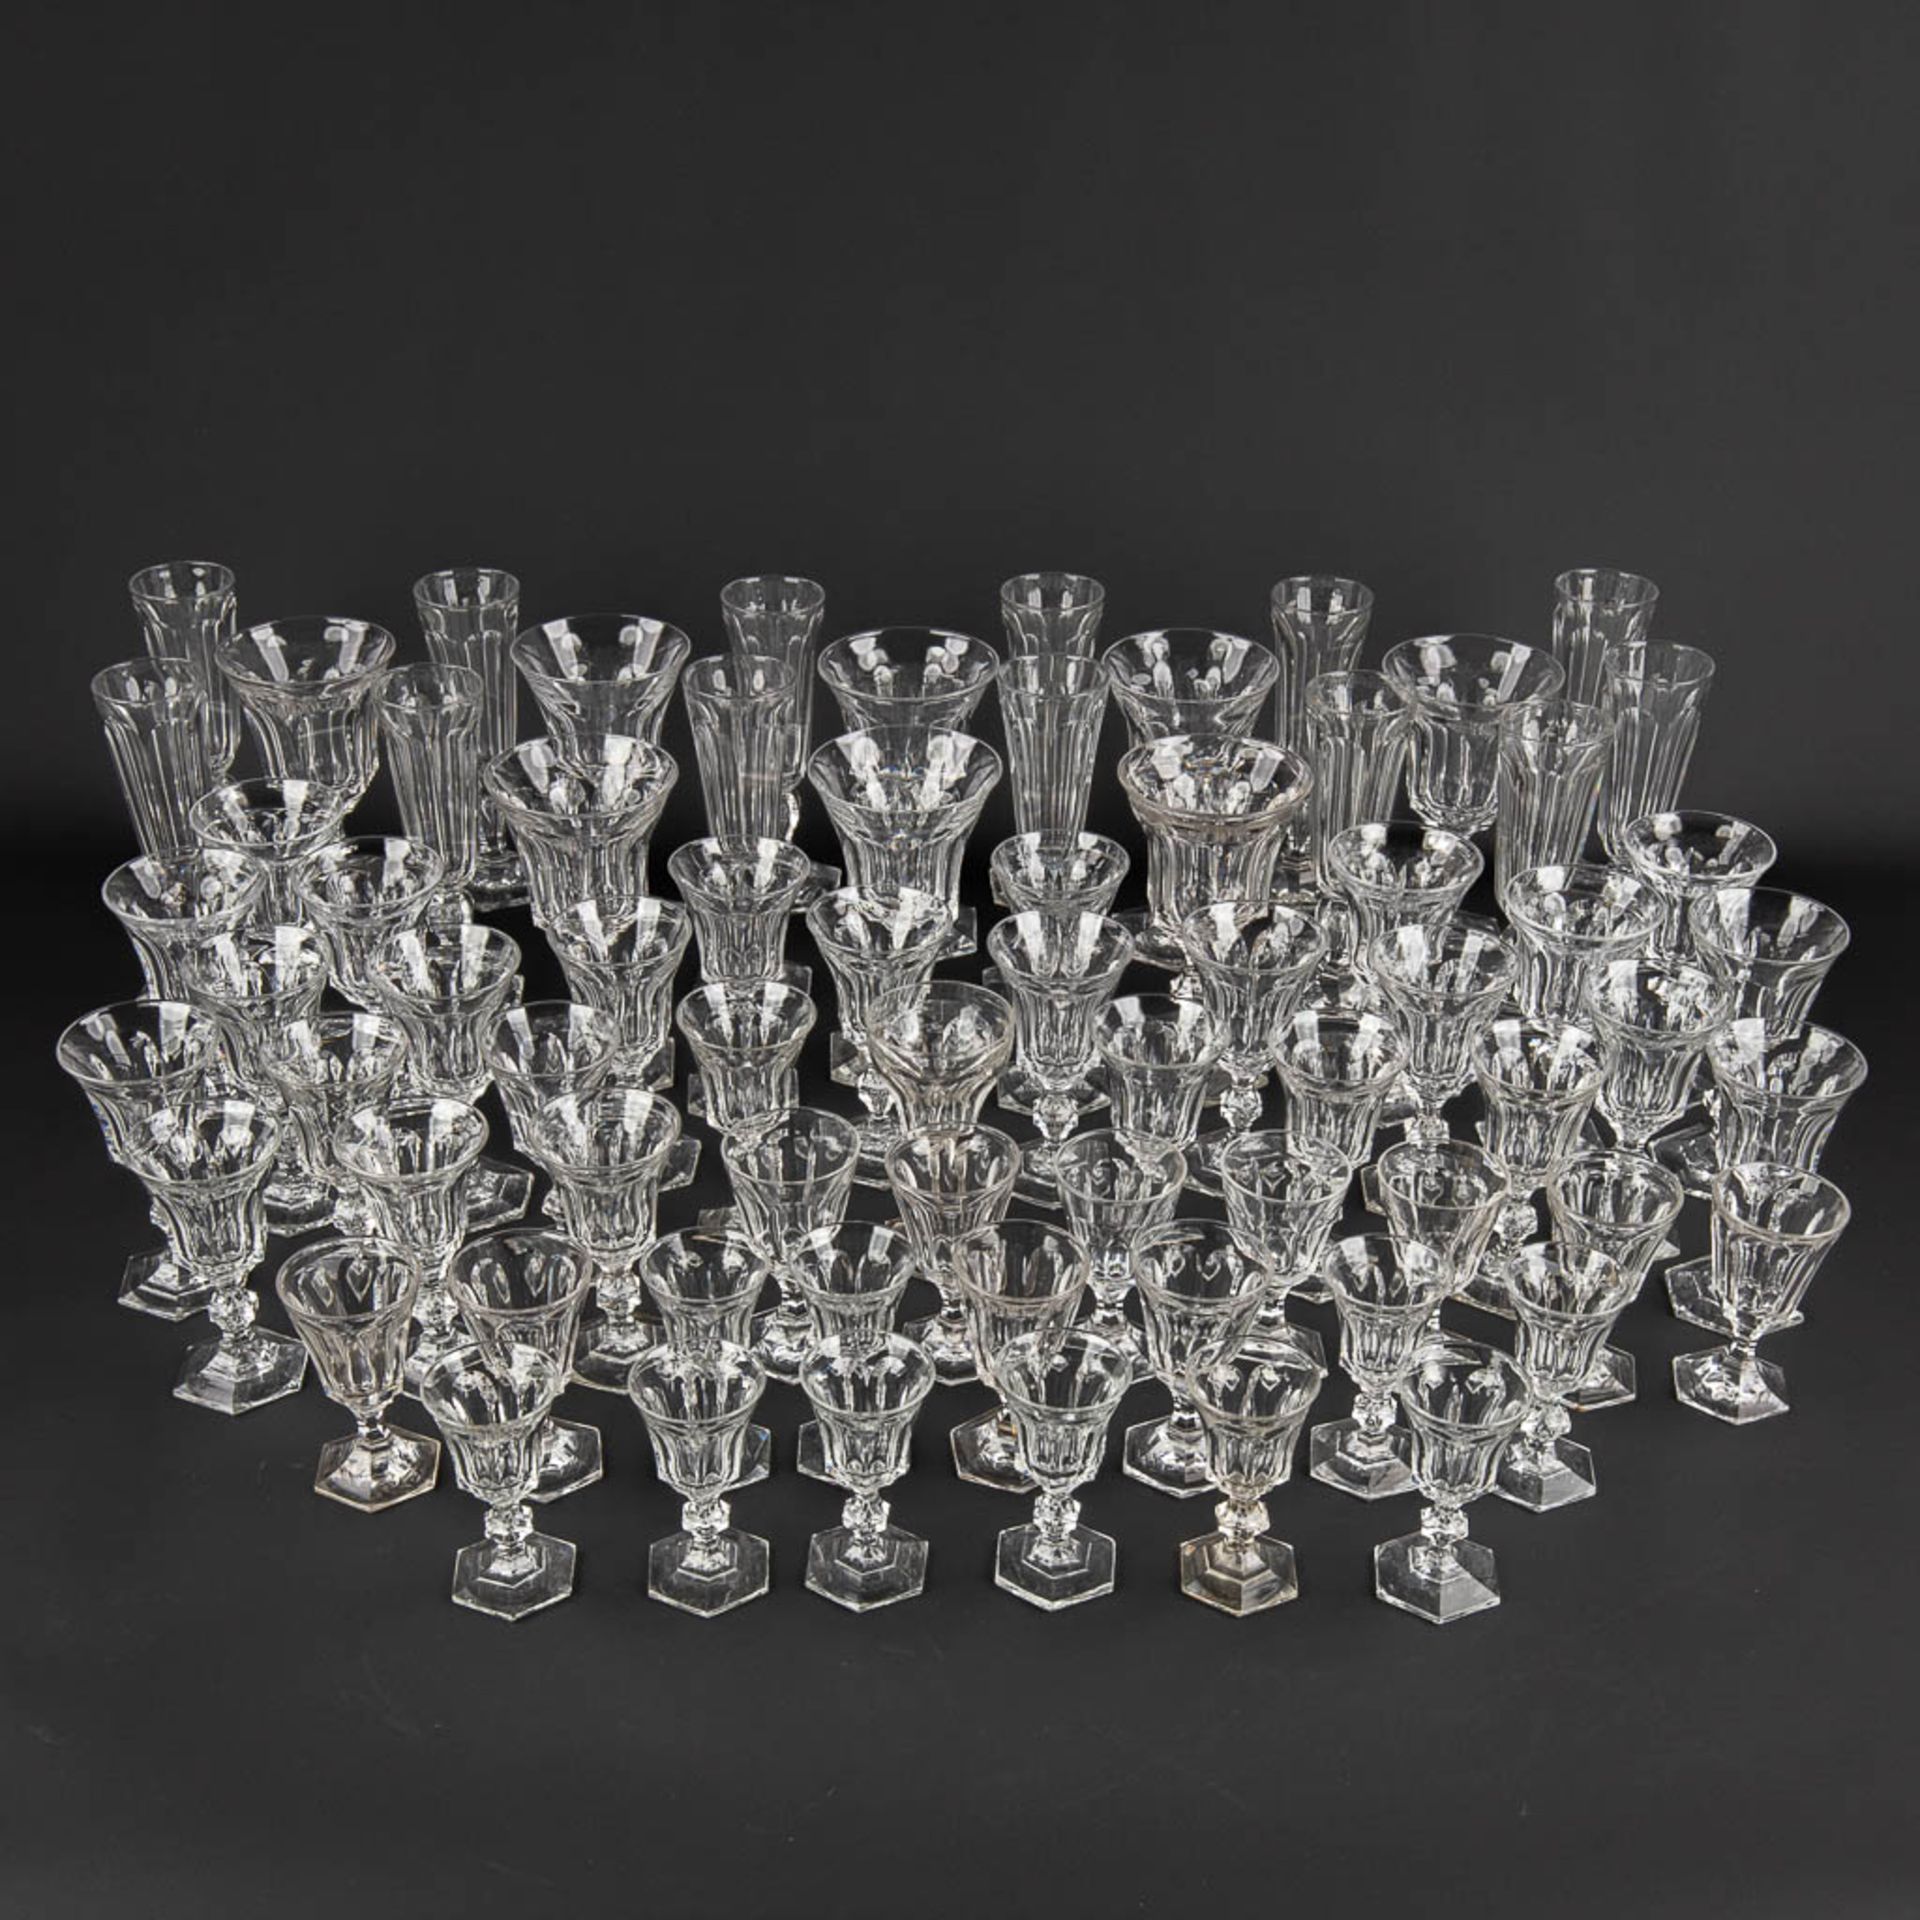 Val Saint Lambert 'Metternich' a set of 46 crystal glasses, added are other glasses (H:18 cm) - Image 3 of 9